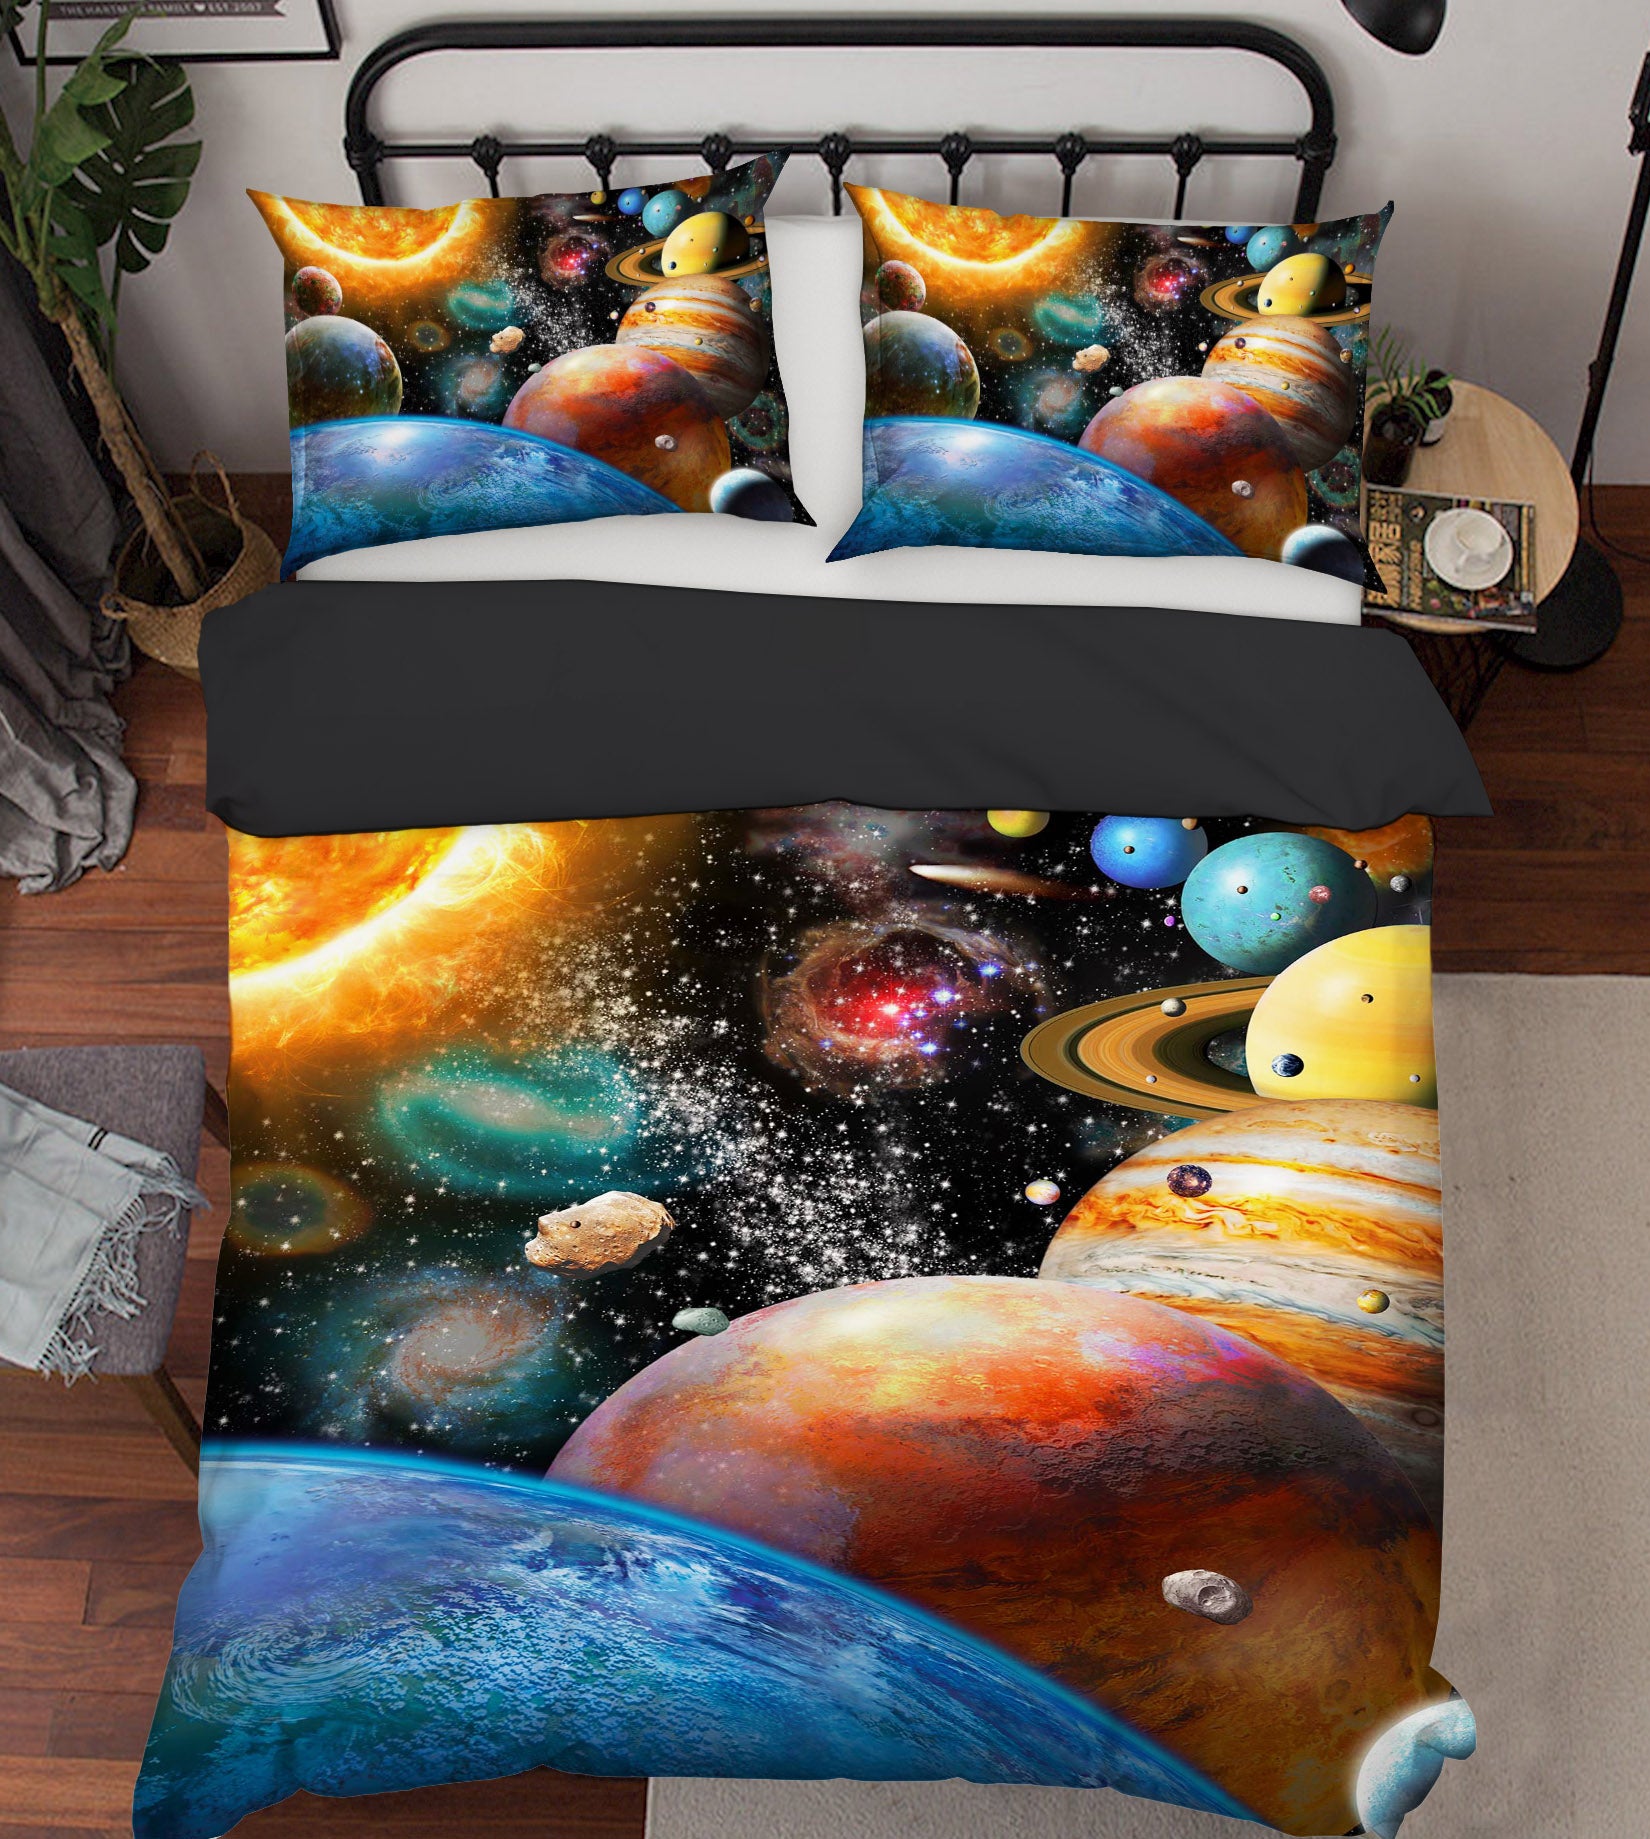 3D Color Planet 2106 Adrian Chesterman Bedding Bed Pillowcases Quilt